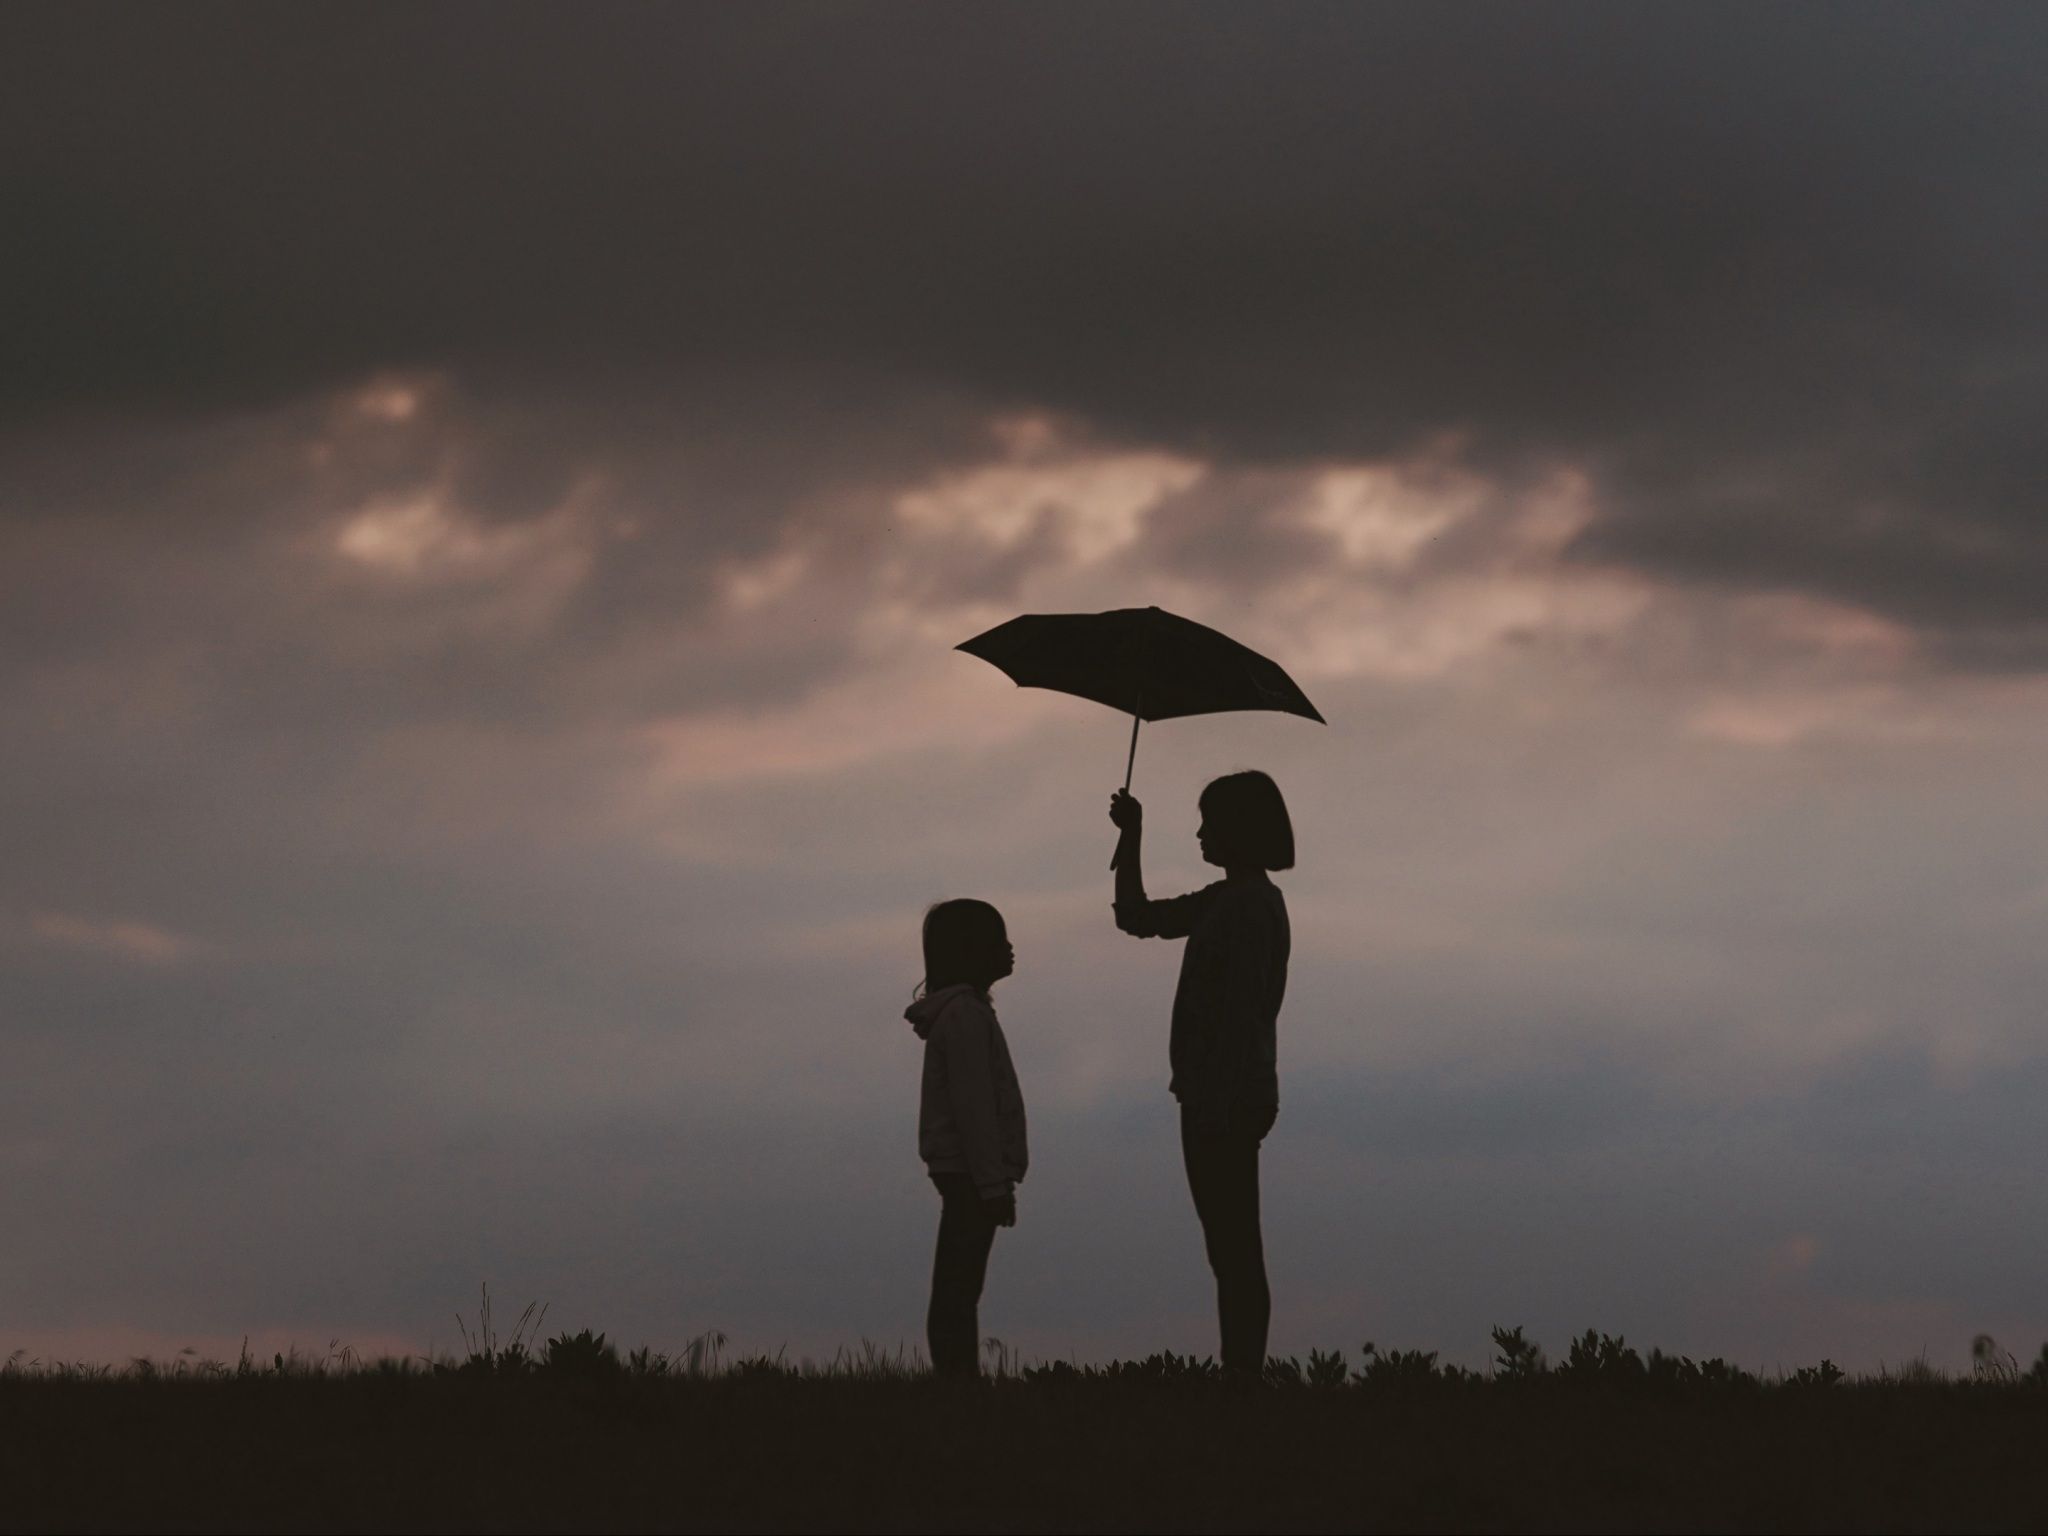 Wallpaper 4k mother, child, care, umbrella, silhouettes, sky 4k Care, child, Mother